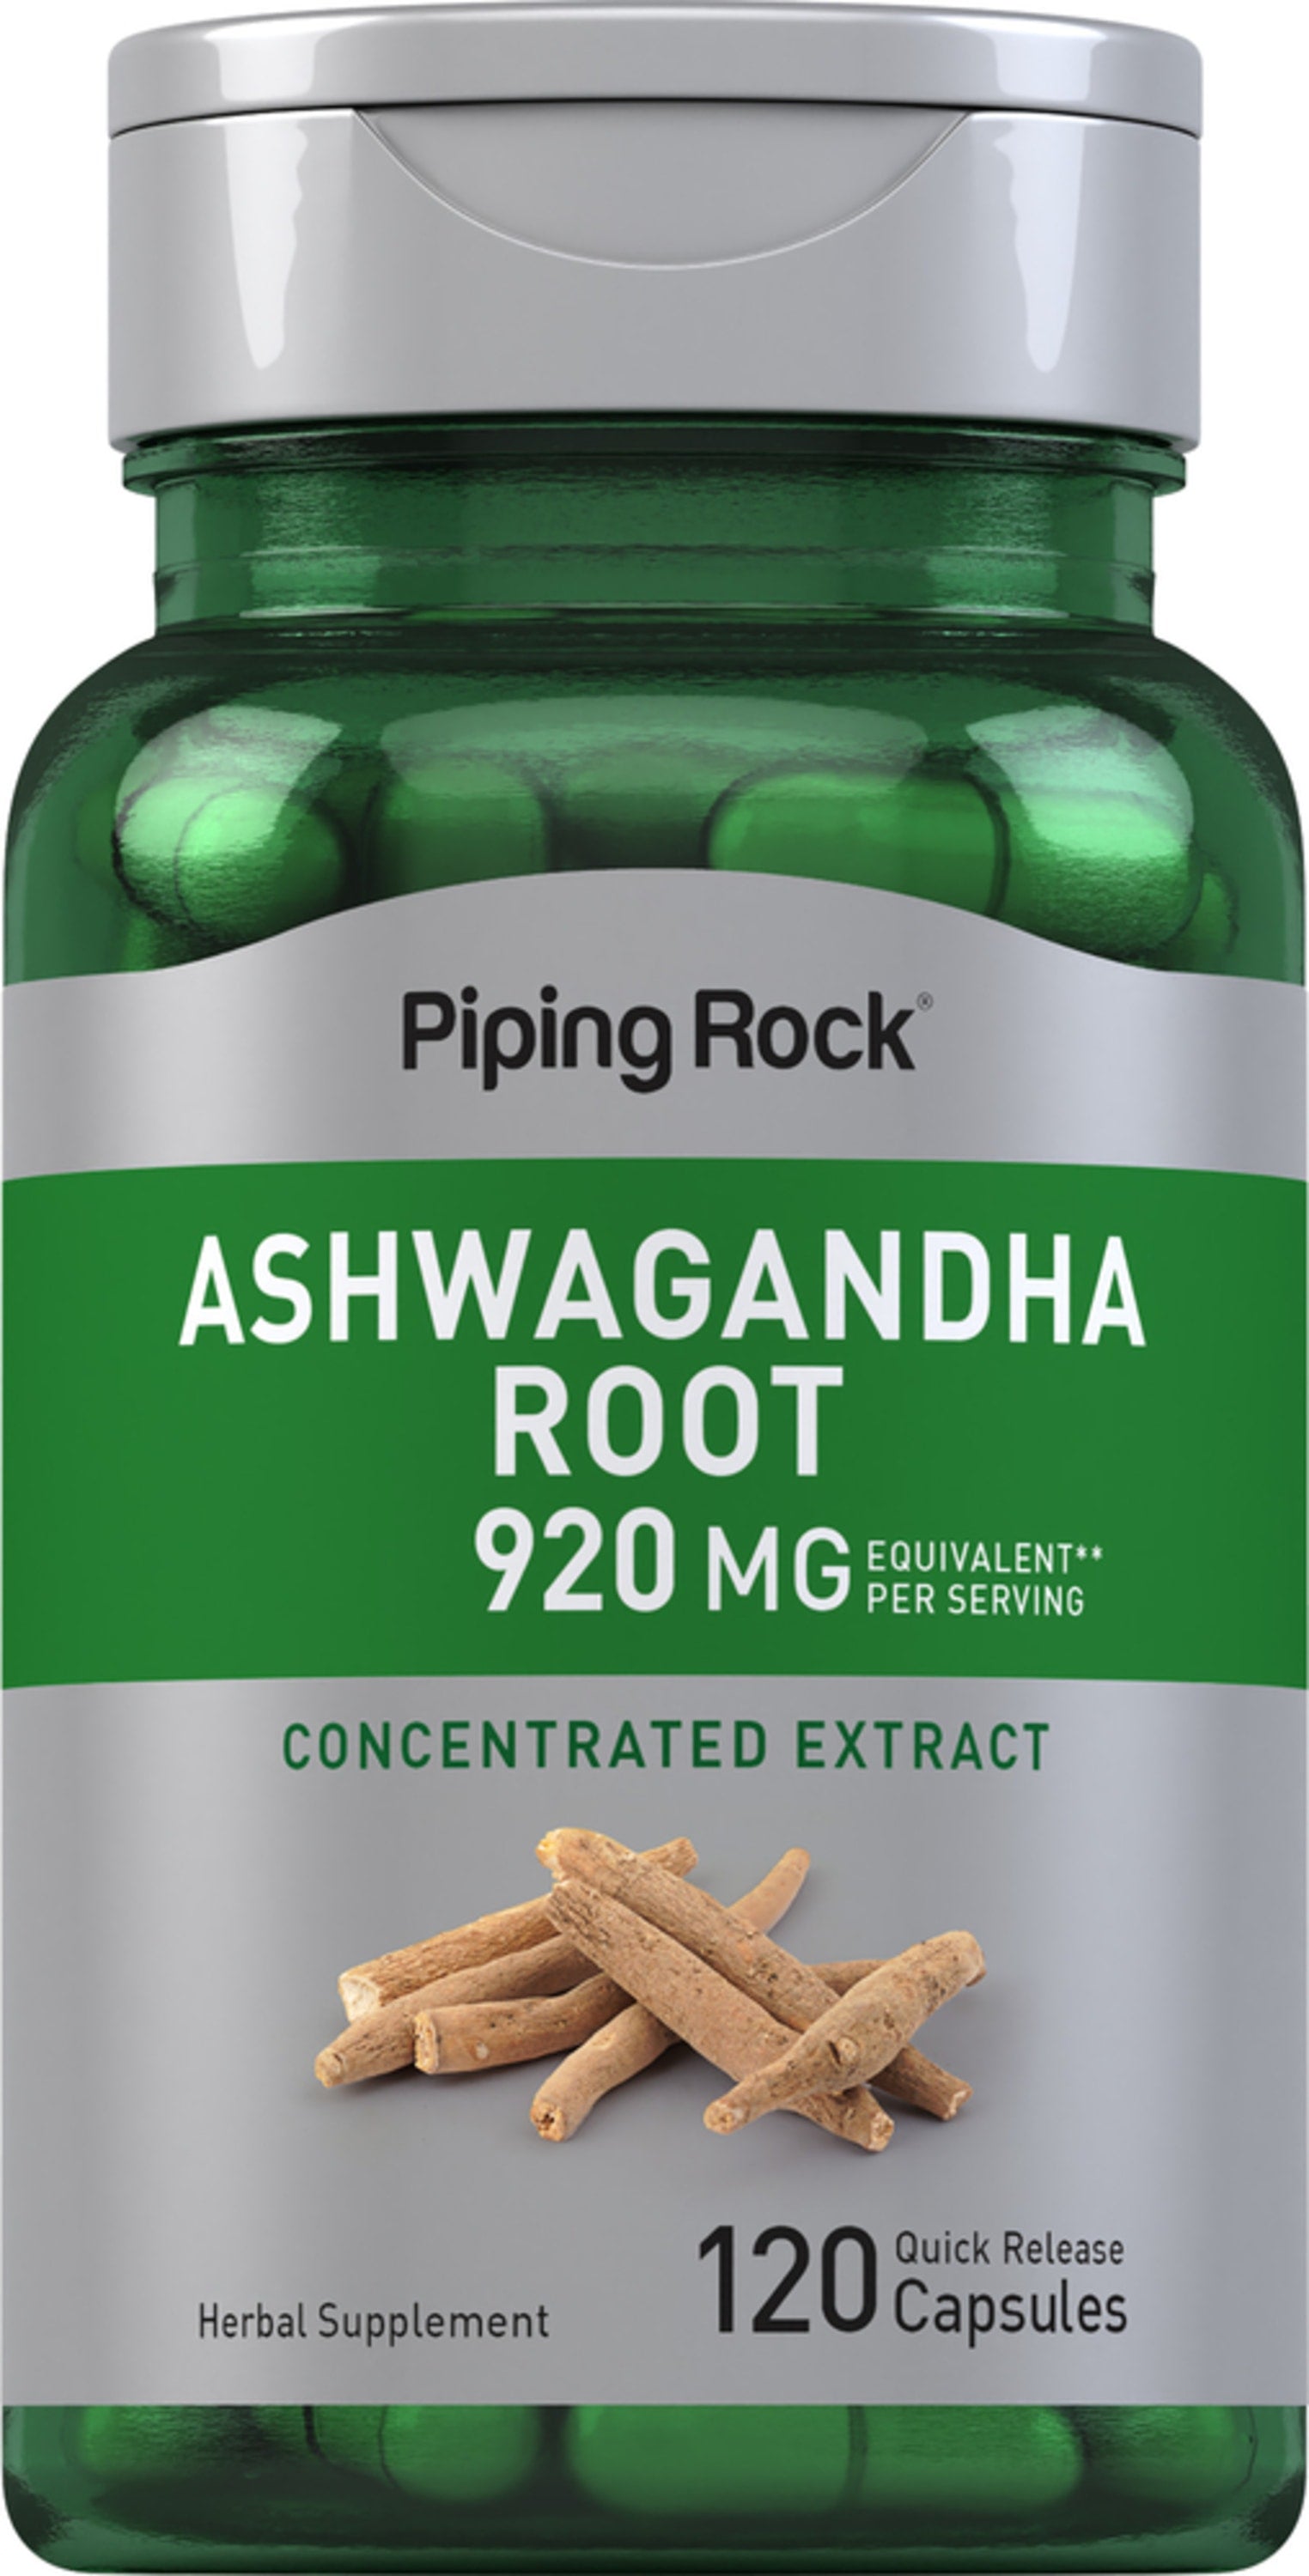 Ashwagandha Root (Withania somnifera), 920 mg (per serving), 120 Quick Release Capsules